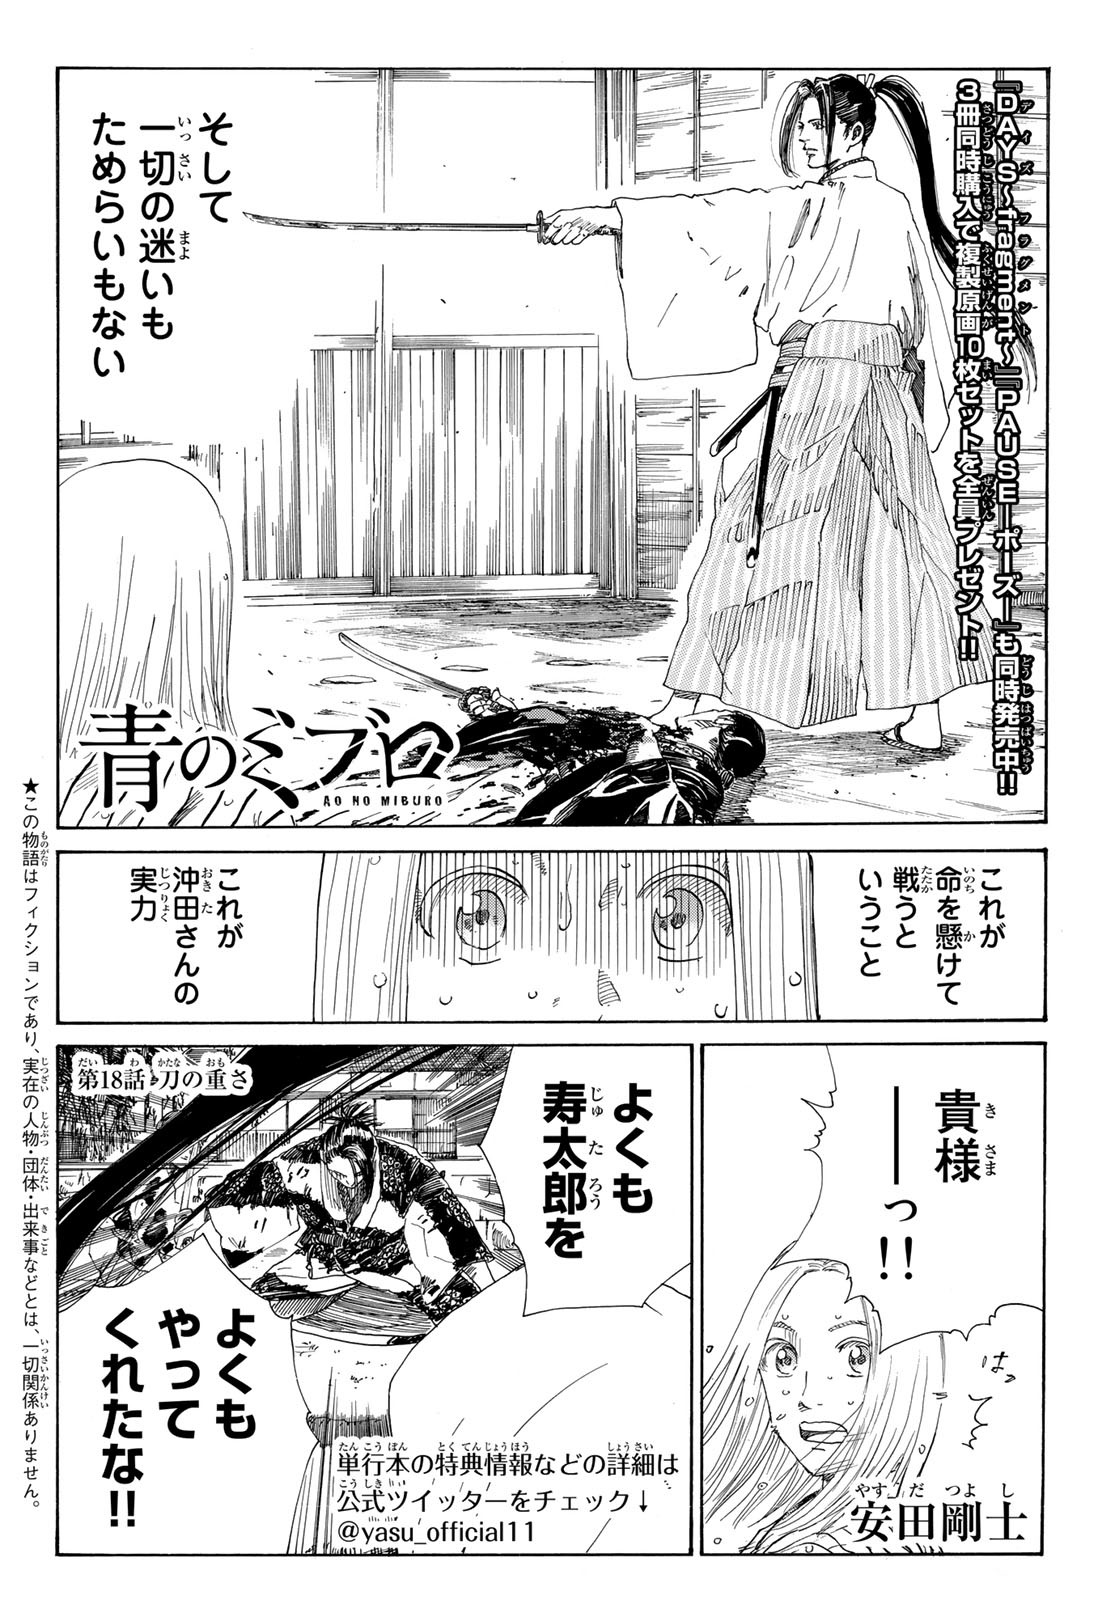 An Mo Miburo 第18話 - Page 2